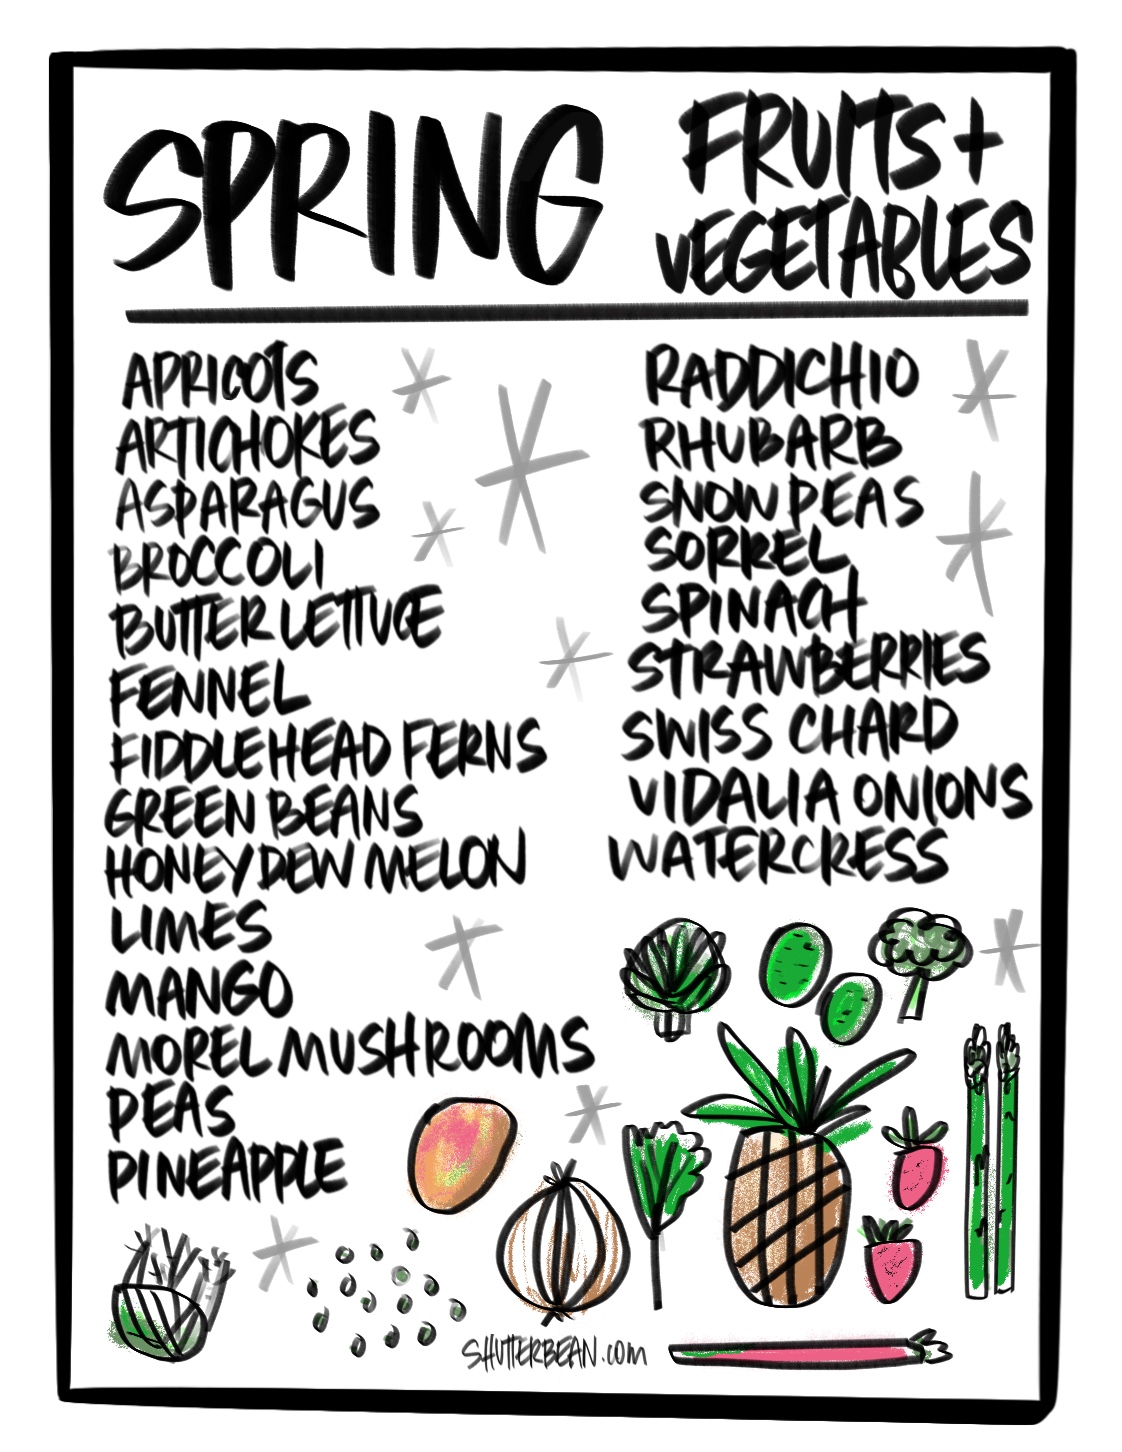 Spring Fruit and Vegetable Recipes